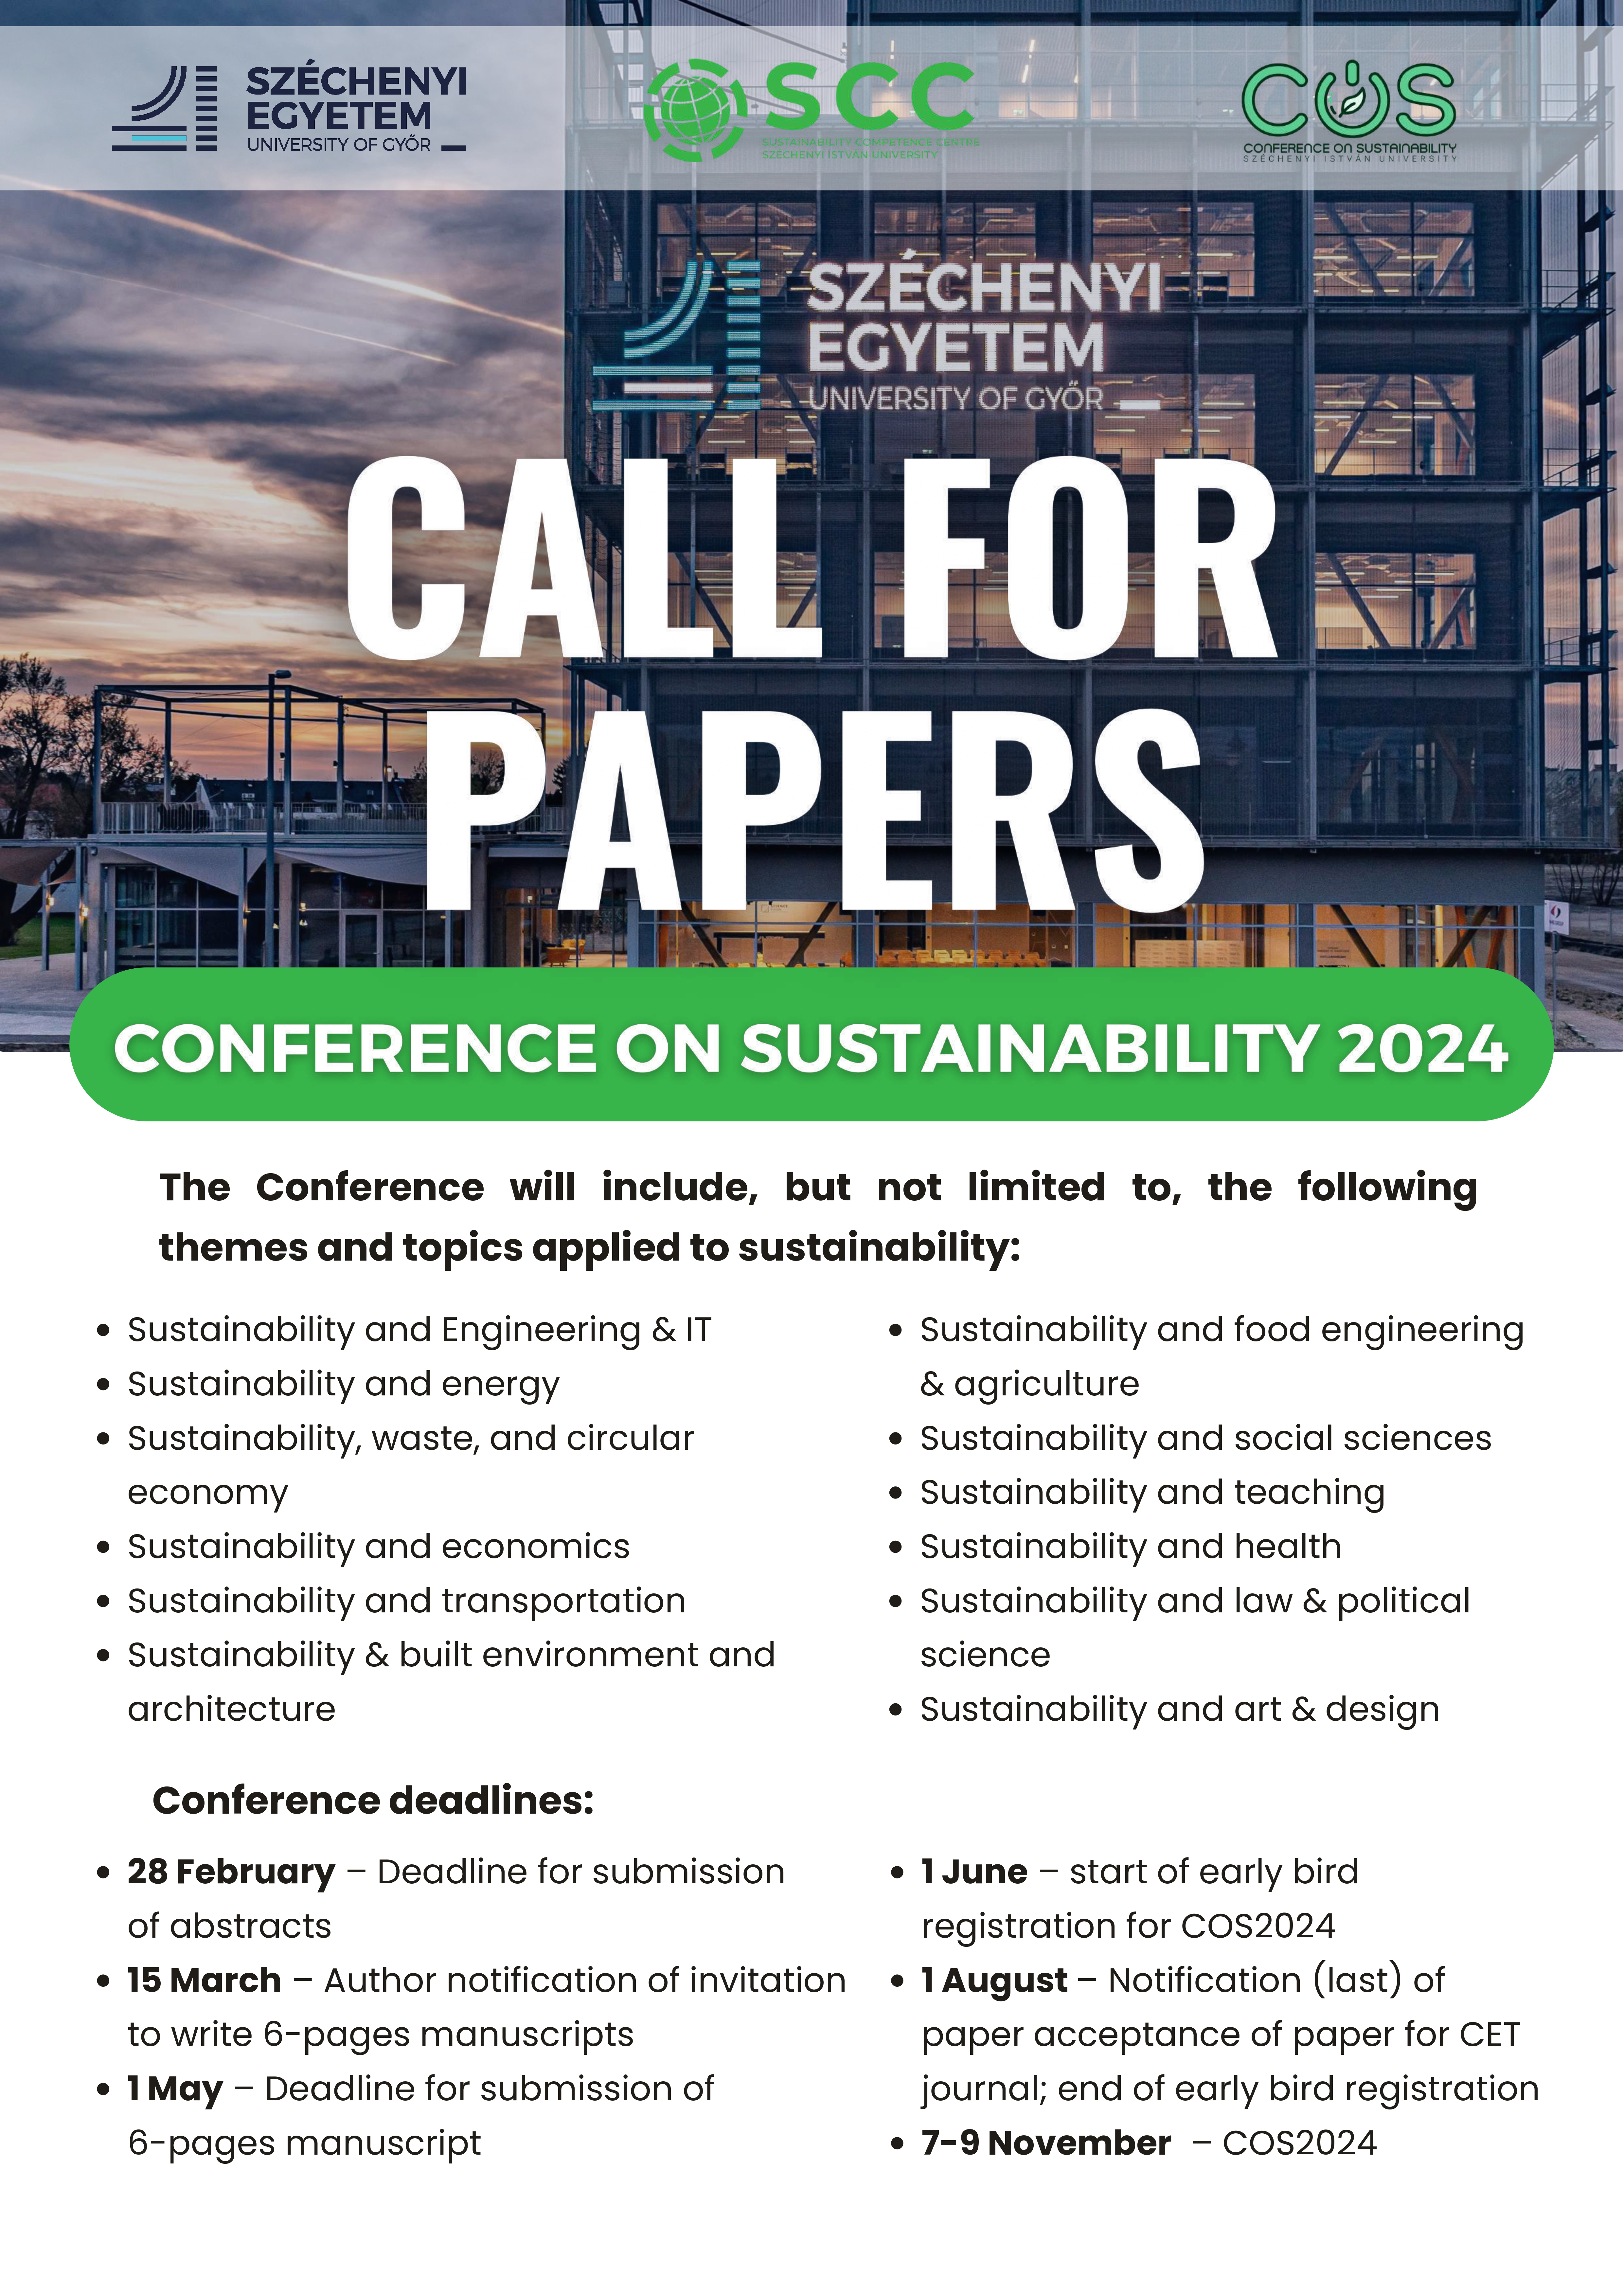 Call for papers COS2024_2_compressed_page-0001.jpg